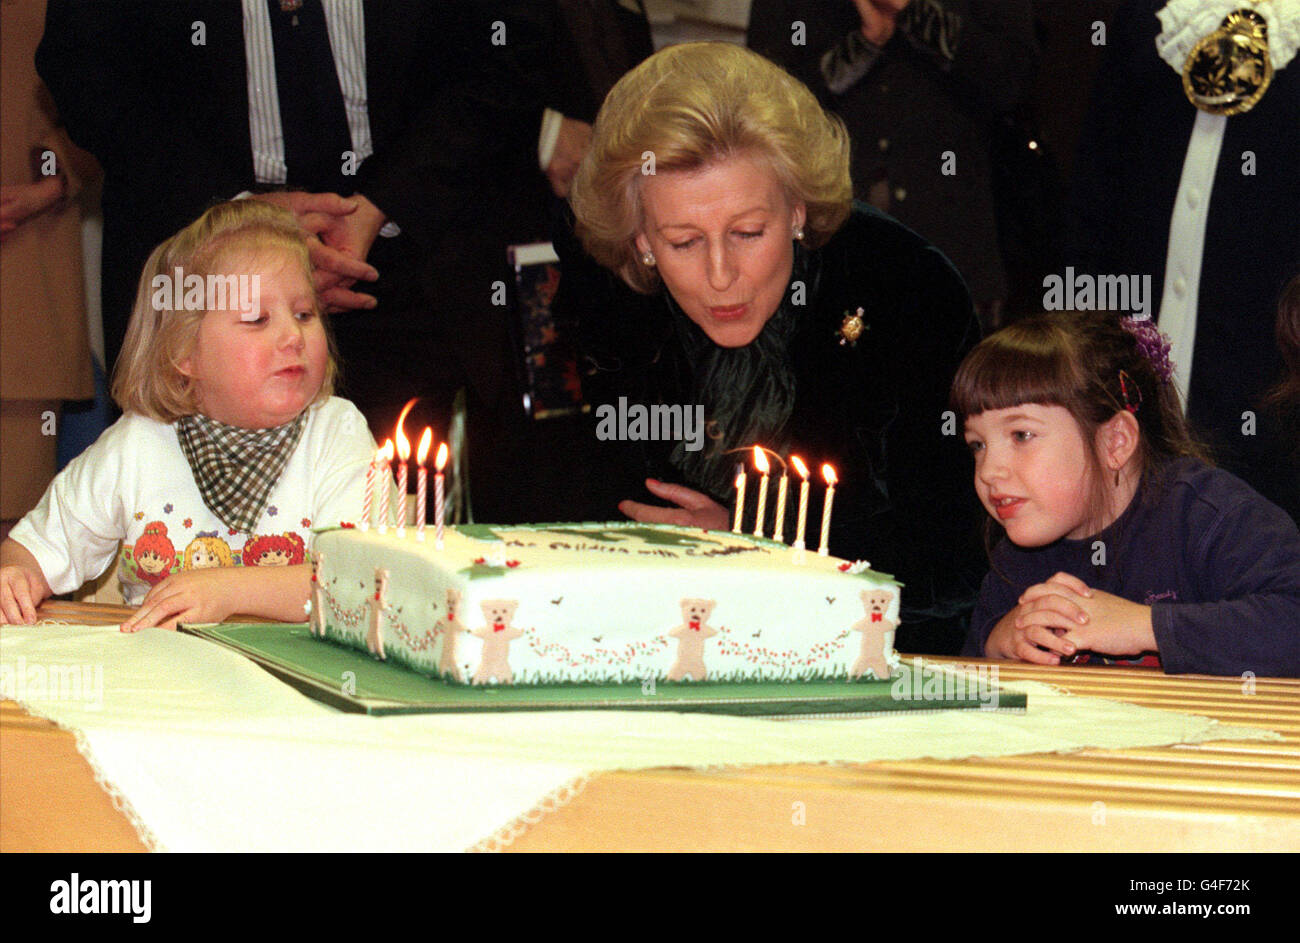 PA NEWS PHOTO 18/11/98 PRINCESS ALEXANDRA HELPS AIMEE HARRIS (L) AND CHELSEA MCGONIGLE (R), BOTH 6, TO BLOW OUT THE CANDLES ON A BIRTHDAY CAKE TO CELEBRATE THE ANNIVERSARY OF THE CONDUCTIVE EDUCATION CENTRE'S 10TH ANNIVERSARY, DURING HER VISIT TO THE CENTRE IN MUSWELL HILL, LONDON. THE CENTRE PRACTISES THE THE PETO SYSTEM FOR CHILDREN WITH CEREBRAL PALSY. Stock Photo